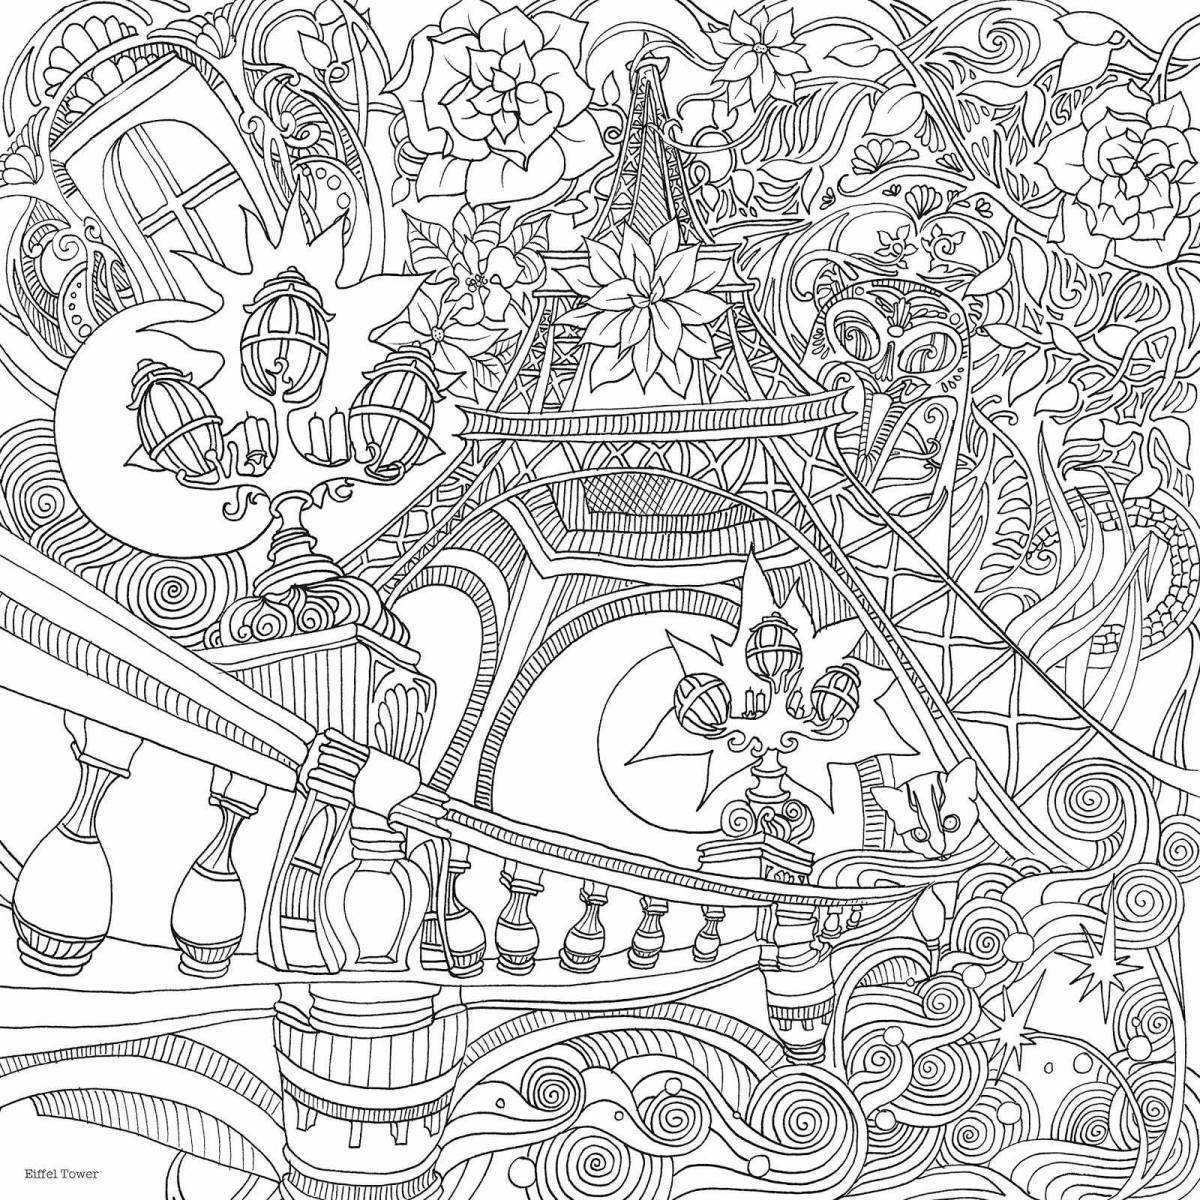 Delicate adult coloring book, large